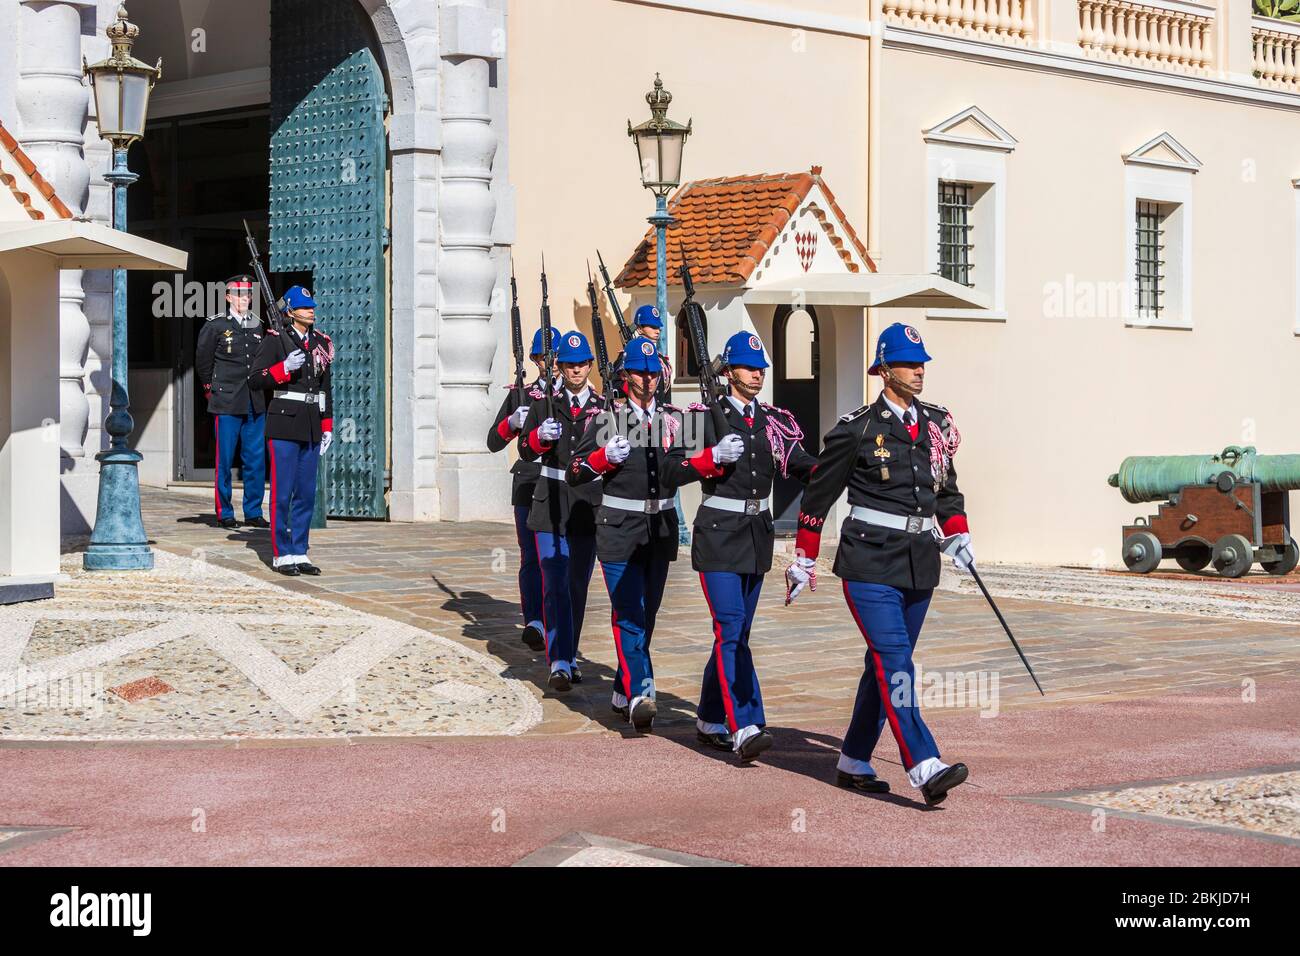 Principality of Monaco, Monaco, the Compagnie des Carabiniers de S.A.S le Prince, the changing of the guard on the place of the princely palace Stock Photo